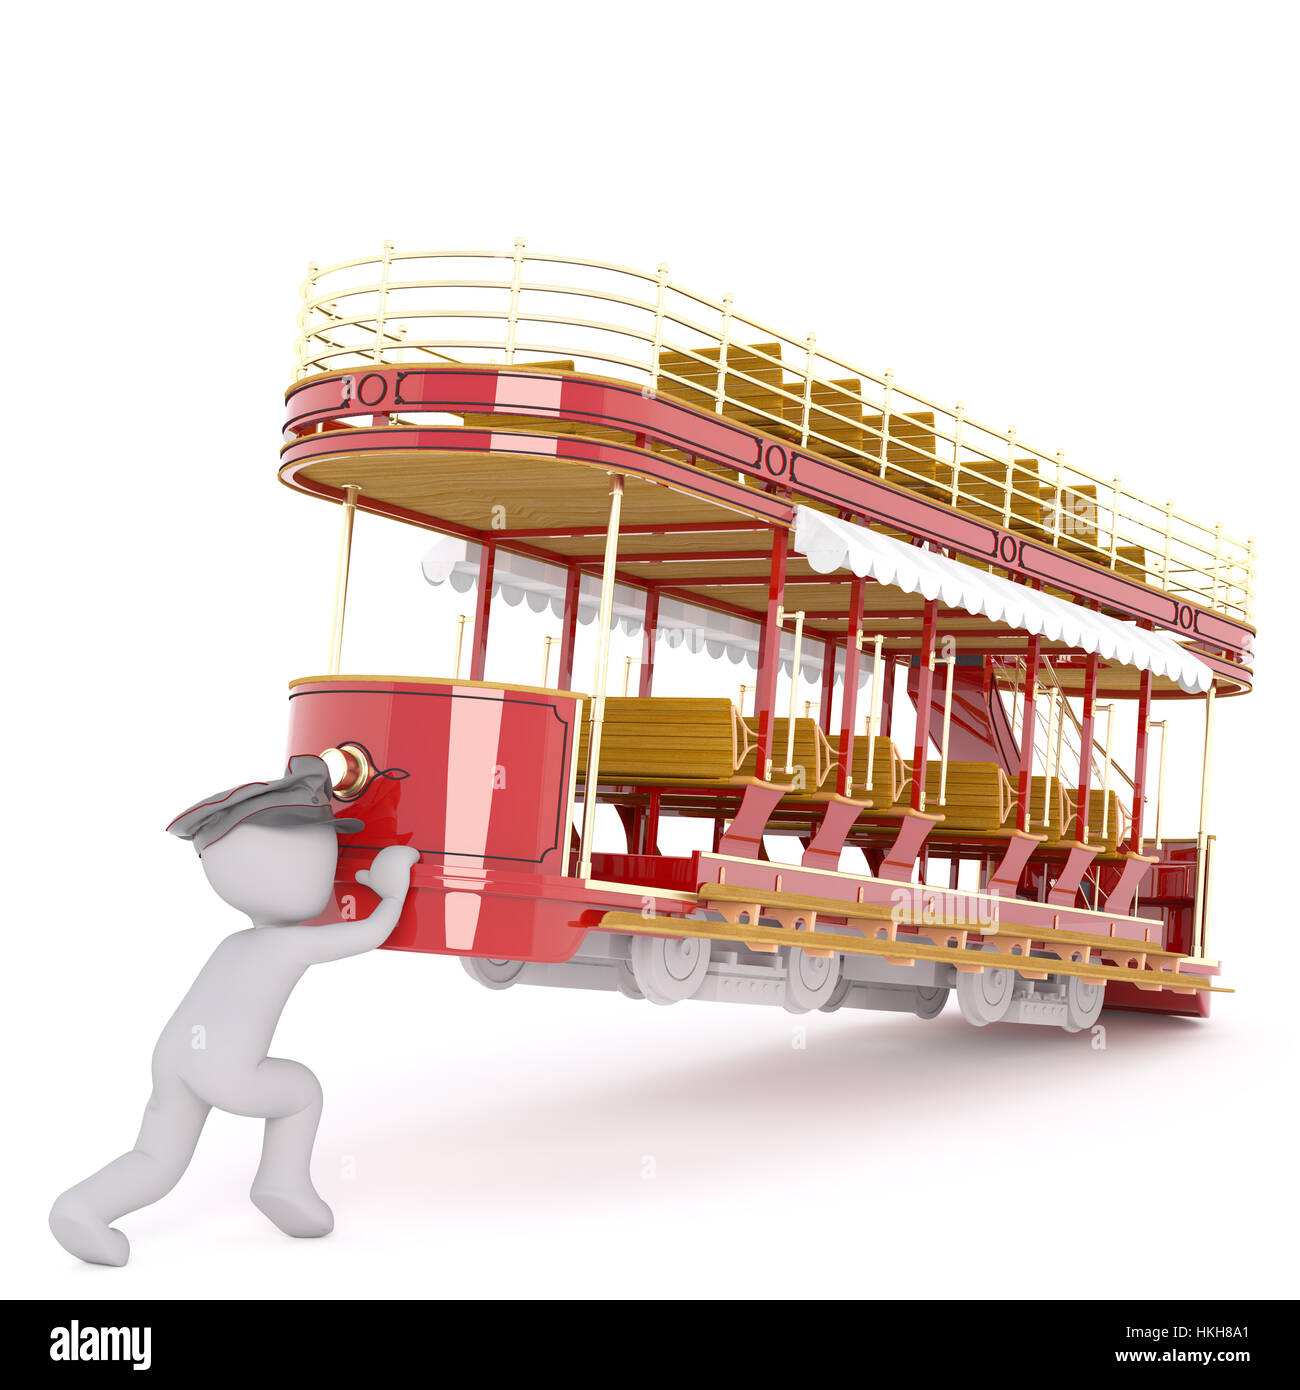 Figure of 3D man tram driver trying to move old red double-decker tram model by lifting it up, isolated on white background Stock Photo